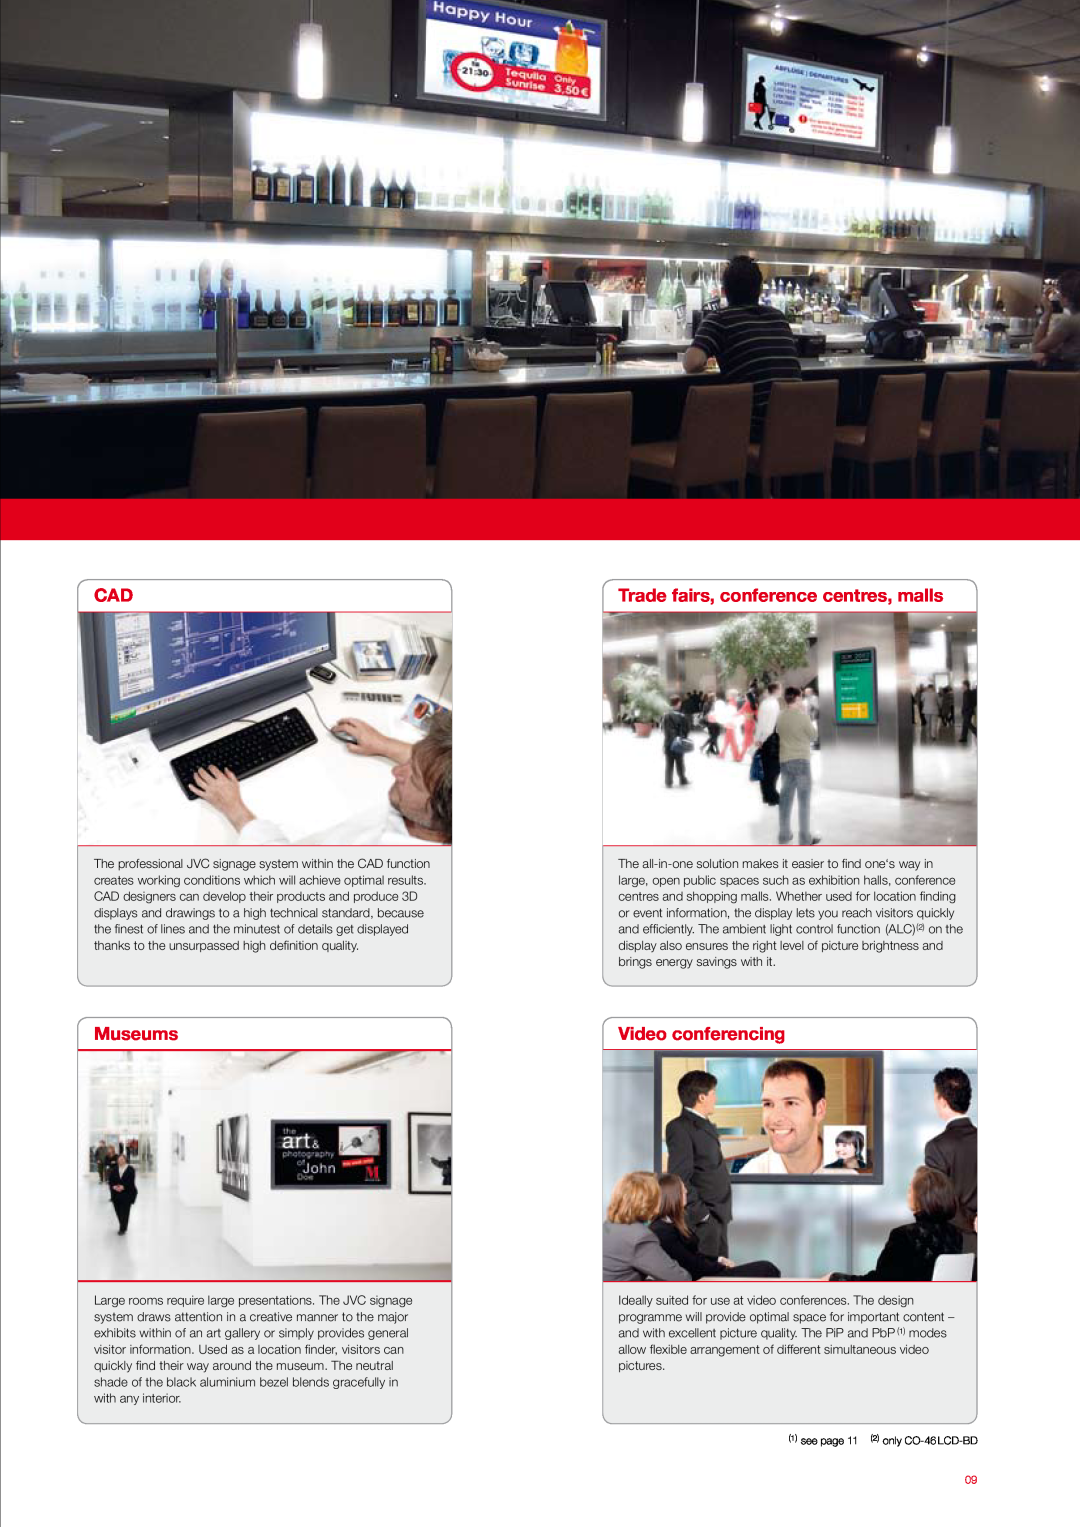 JVC GM-H40L2 manual Museums, Trade fairs, conference centres, malls, Video conferencing, ¹ see page 11 ² only CO-46 LCD-BD 